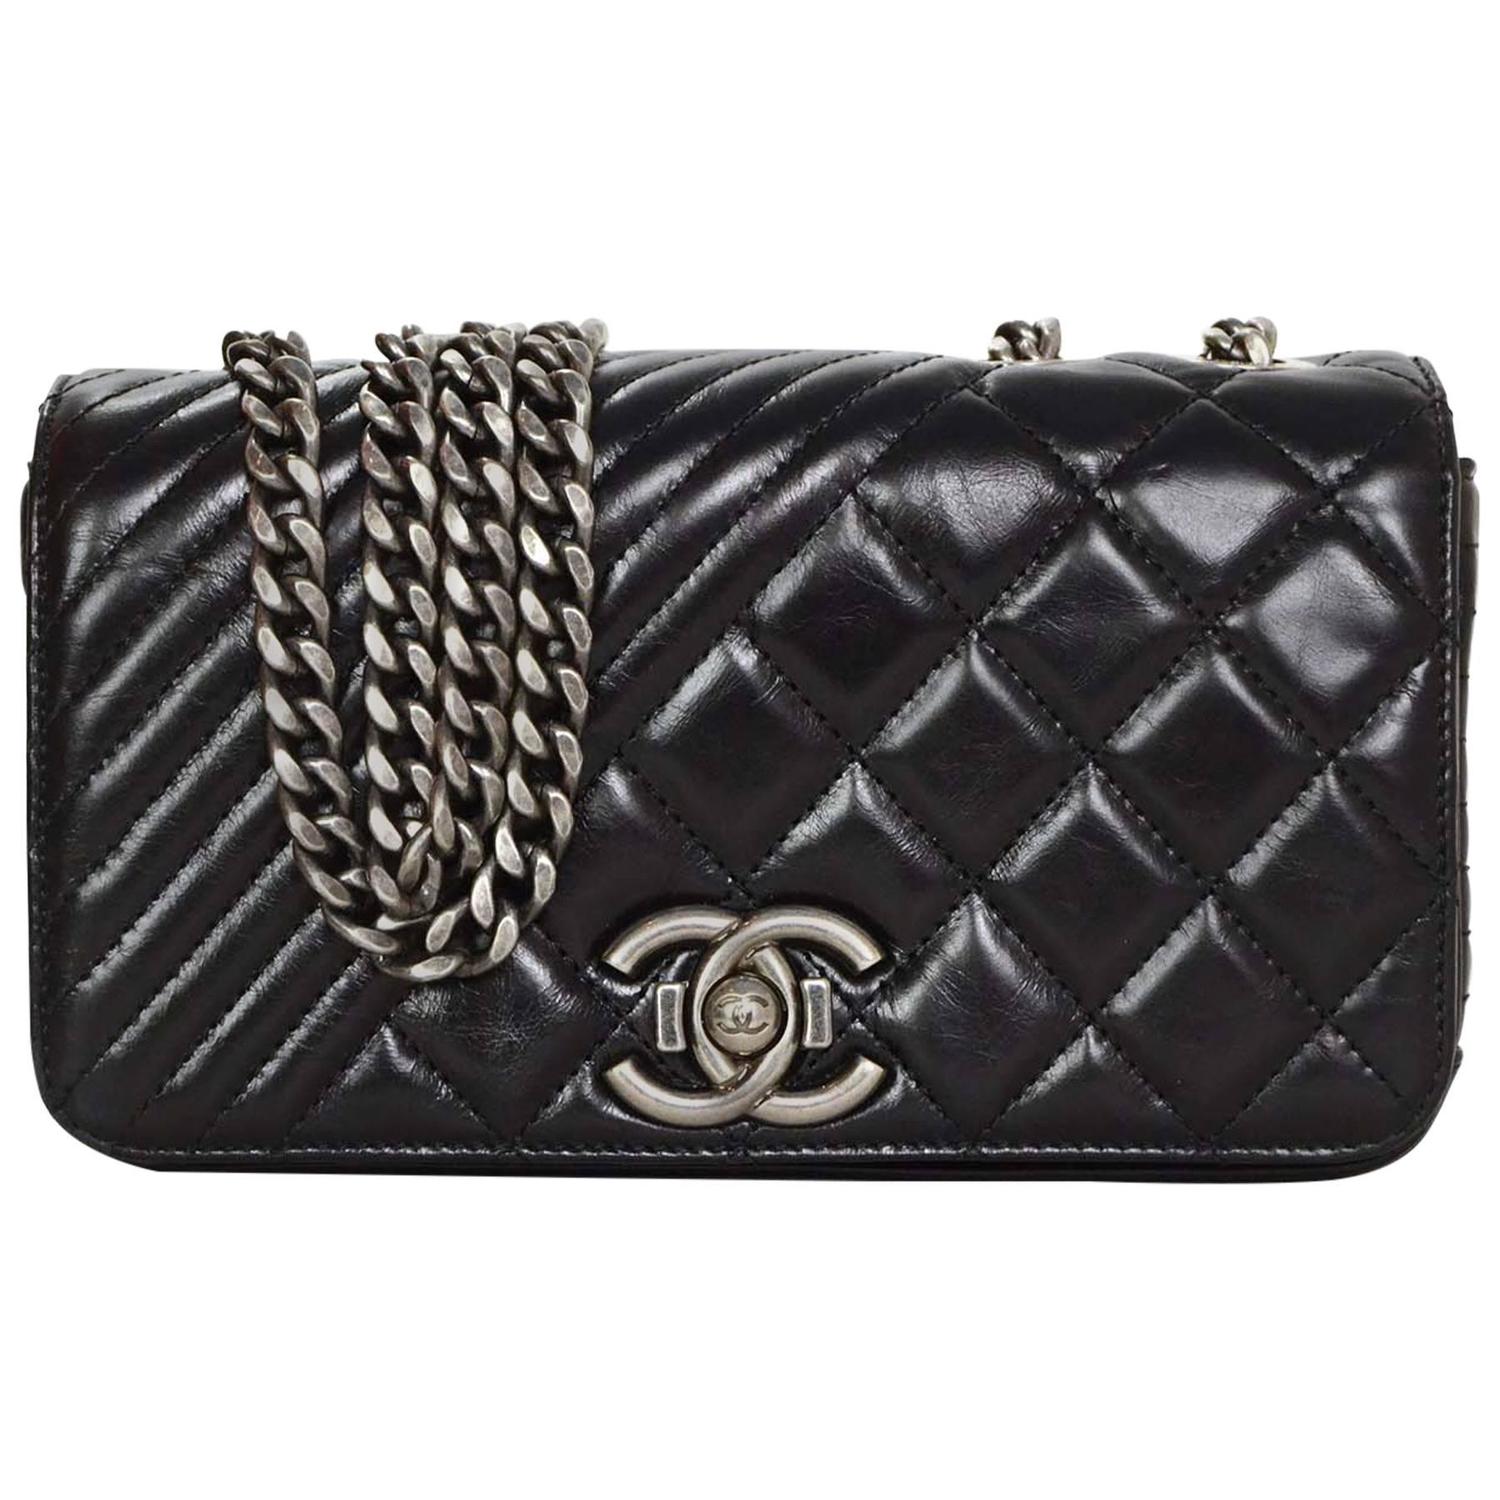 Chanel 2015 Black Leather Dual Quilted Mini Coco Boy Crossbody Bag SHW For Sale at 1stdibs